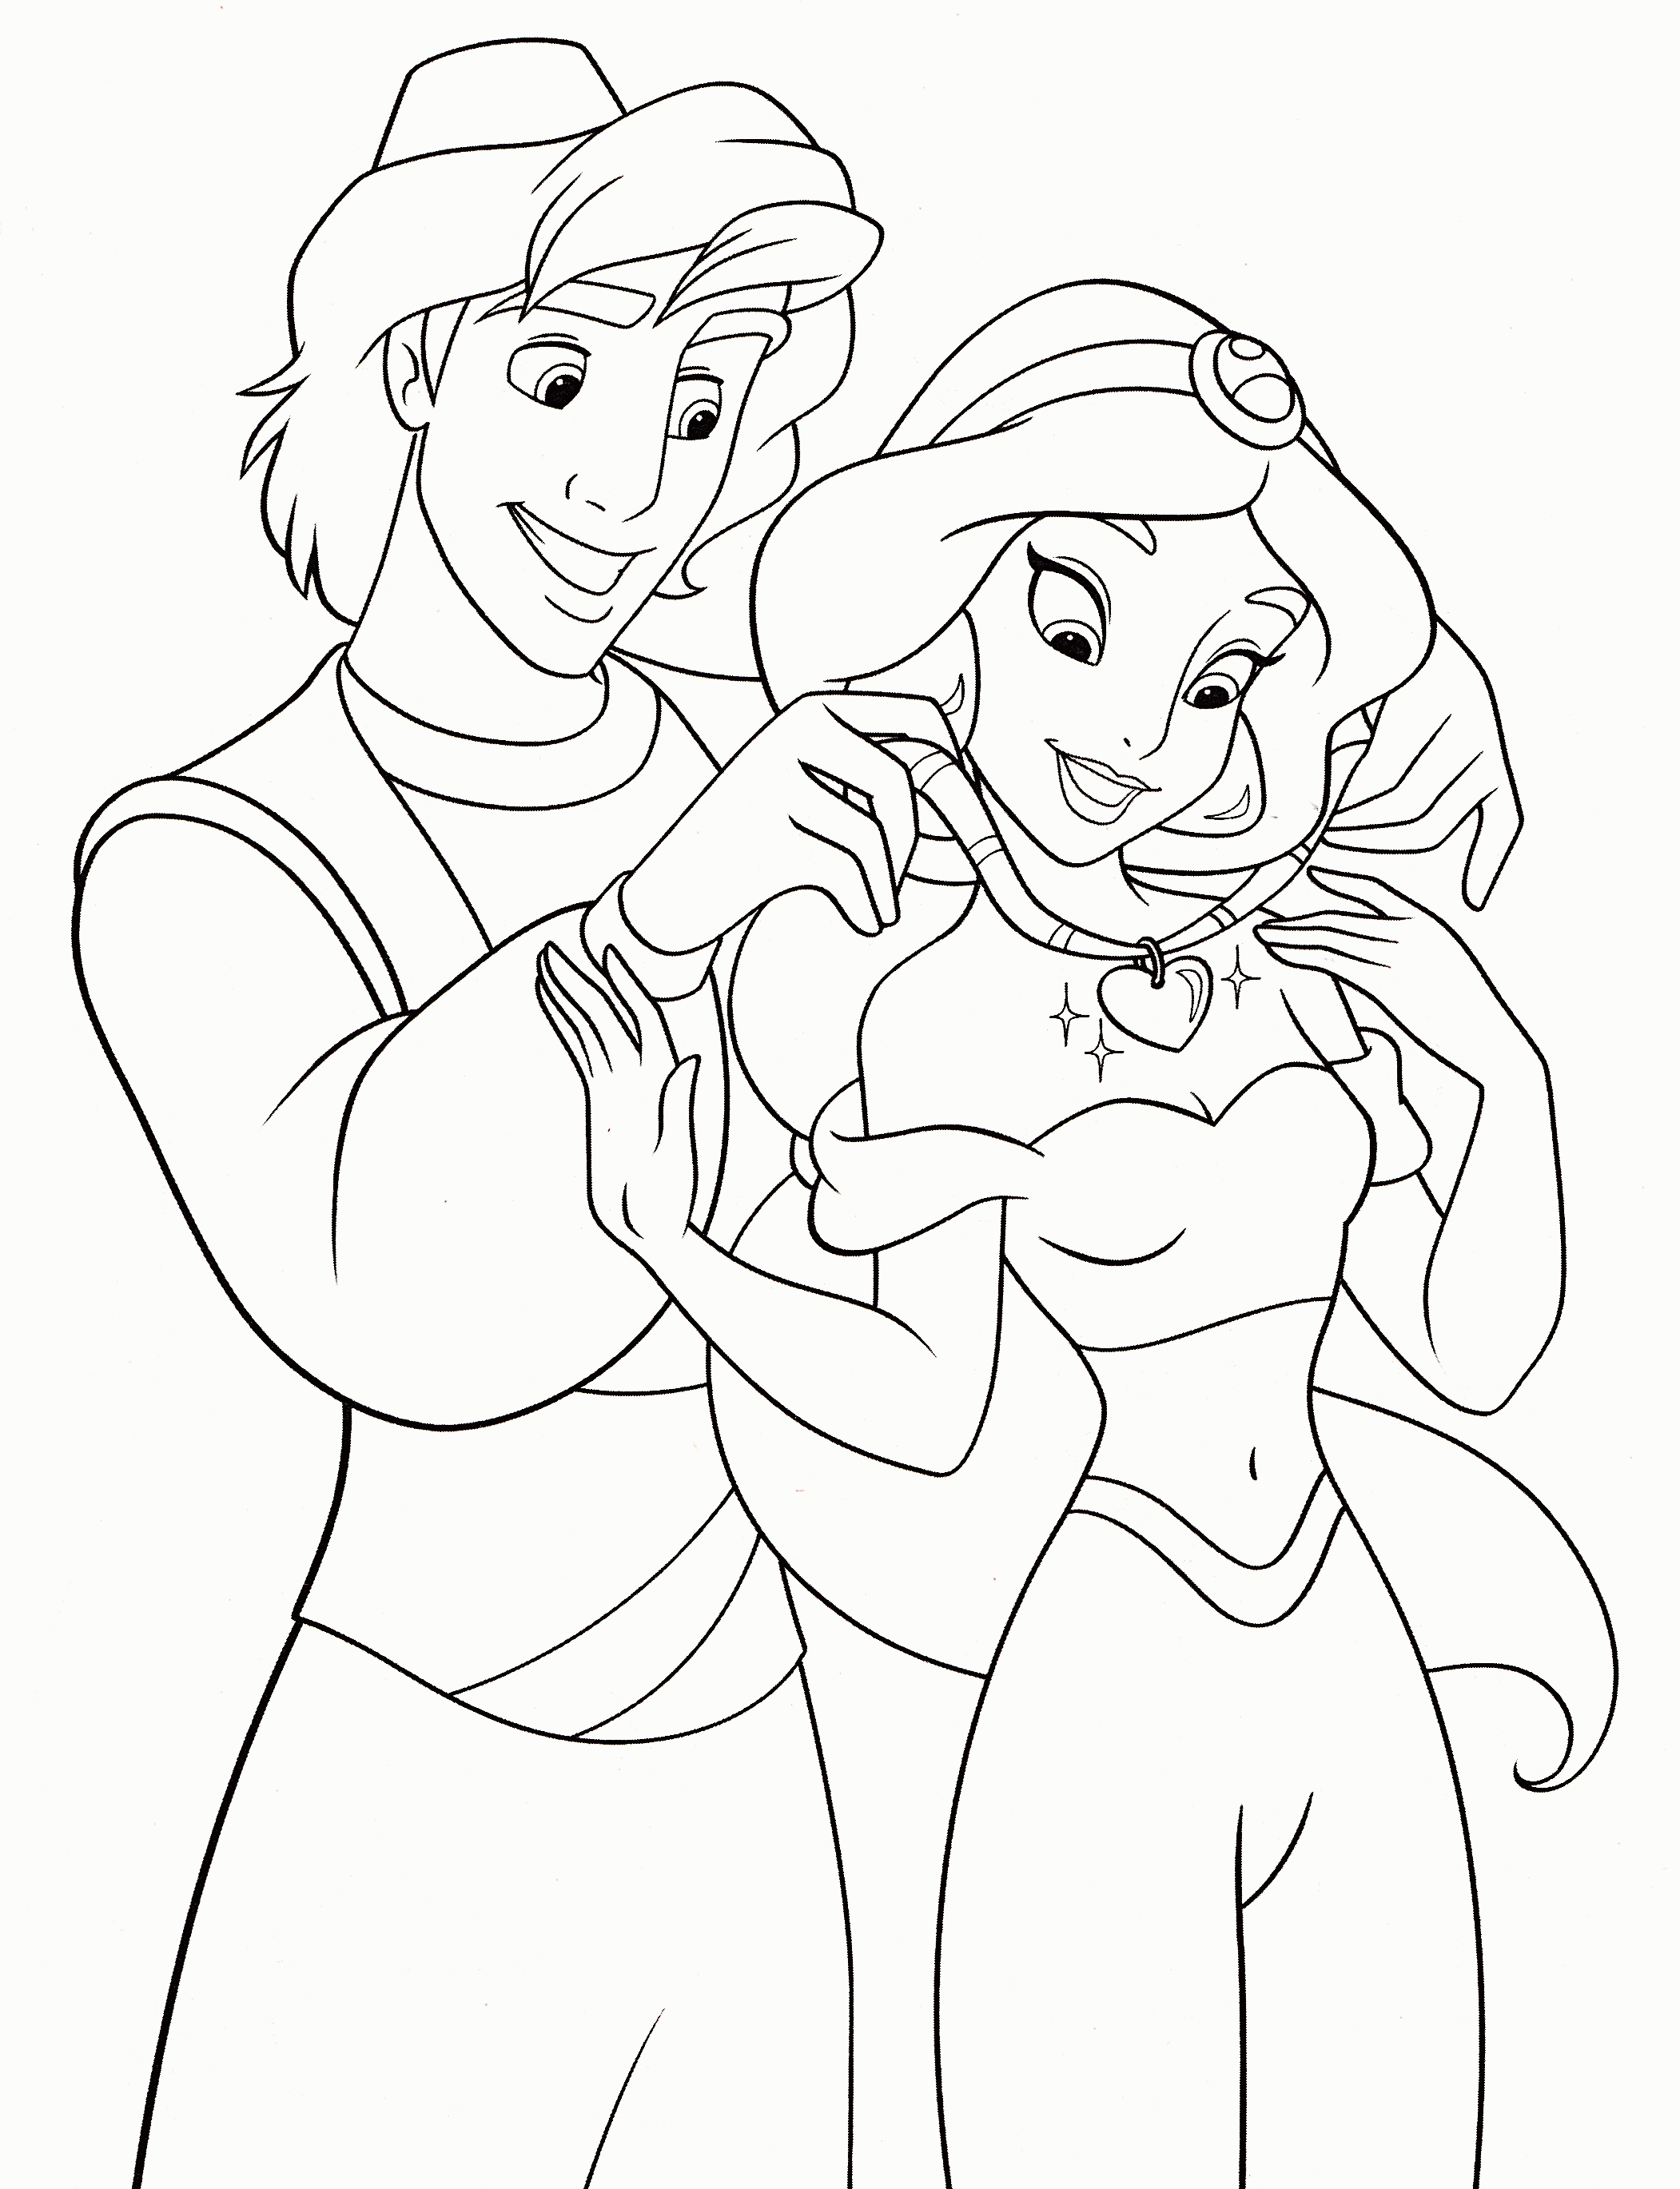 disneys aladdin and princess jasmine coloring pages | Only ...